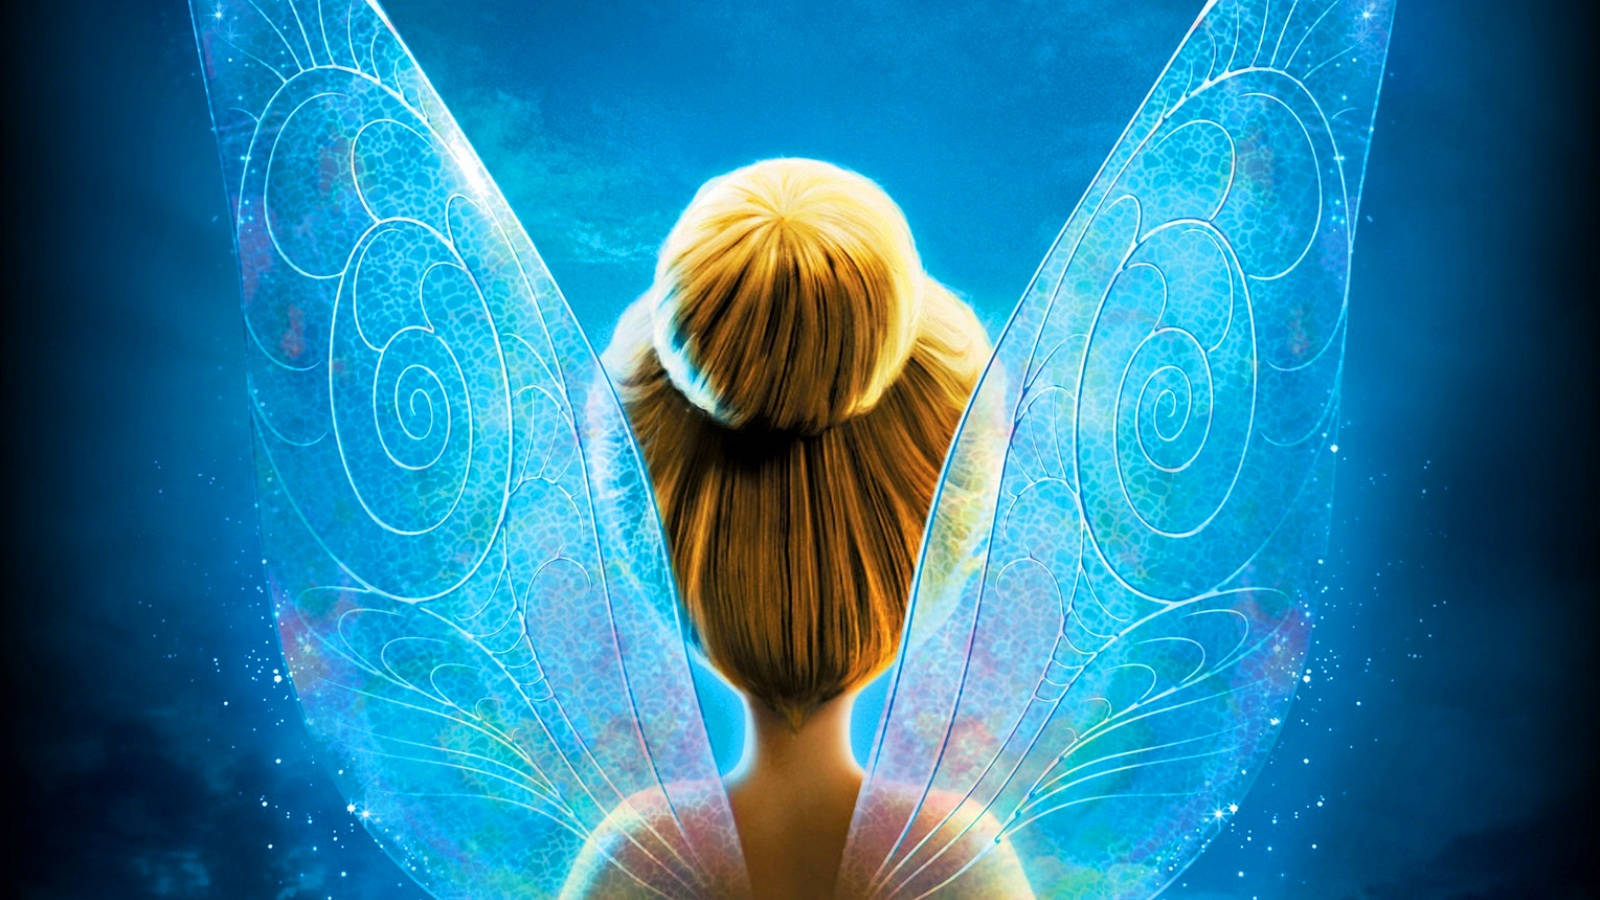 Tinker Bell Glowing Wings Background